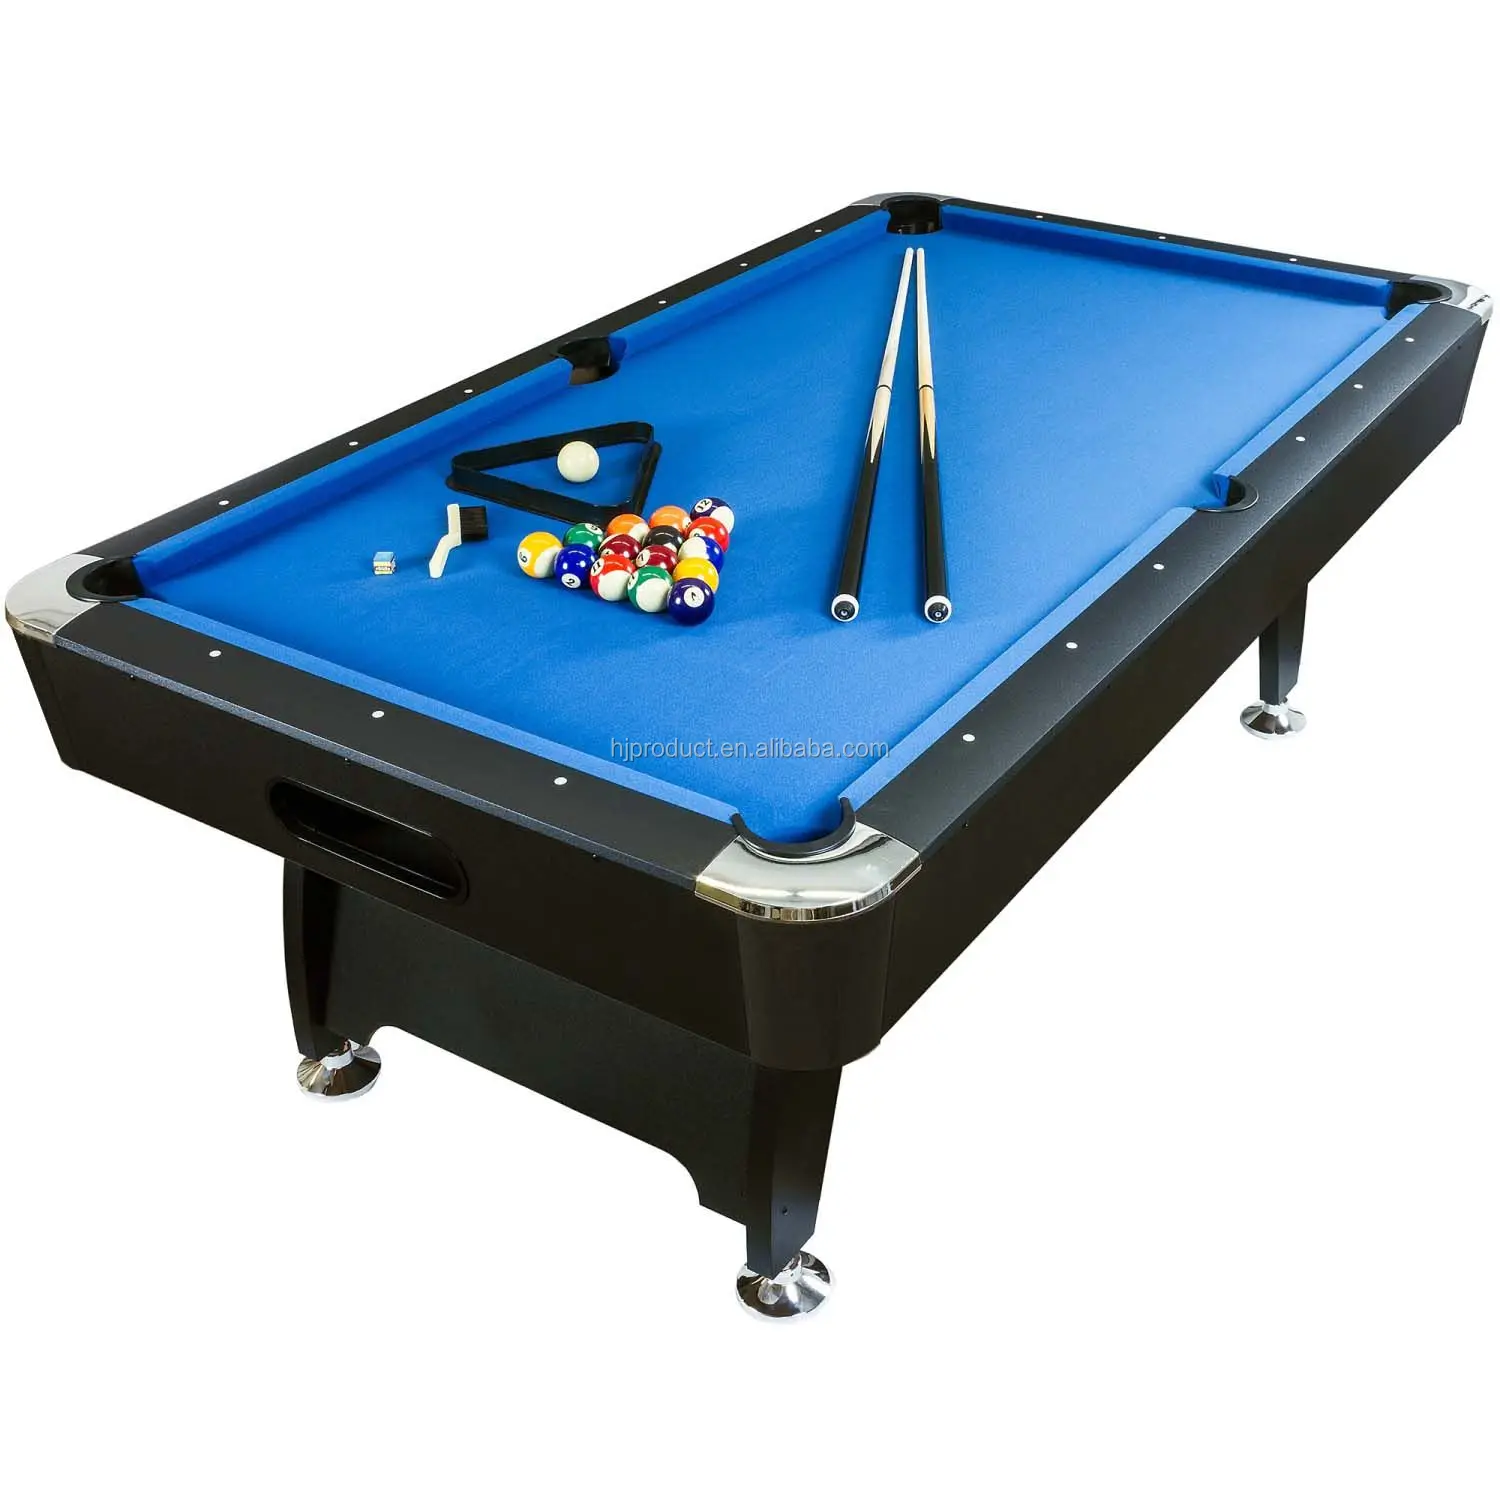 Most Popular 7 Ft 8 Ft Billiard Table Easy Assembly 8 Ball Pool 